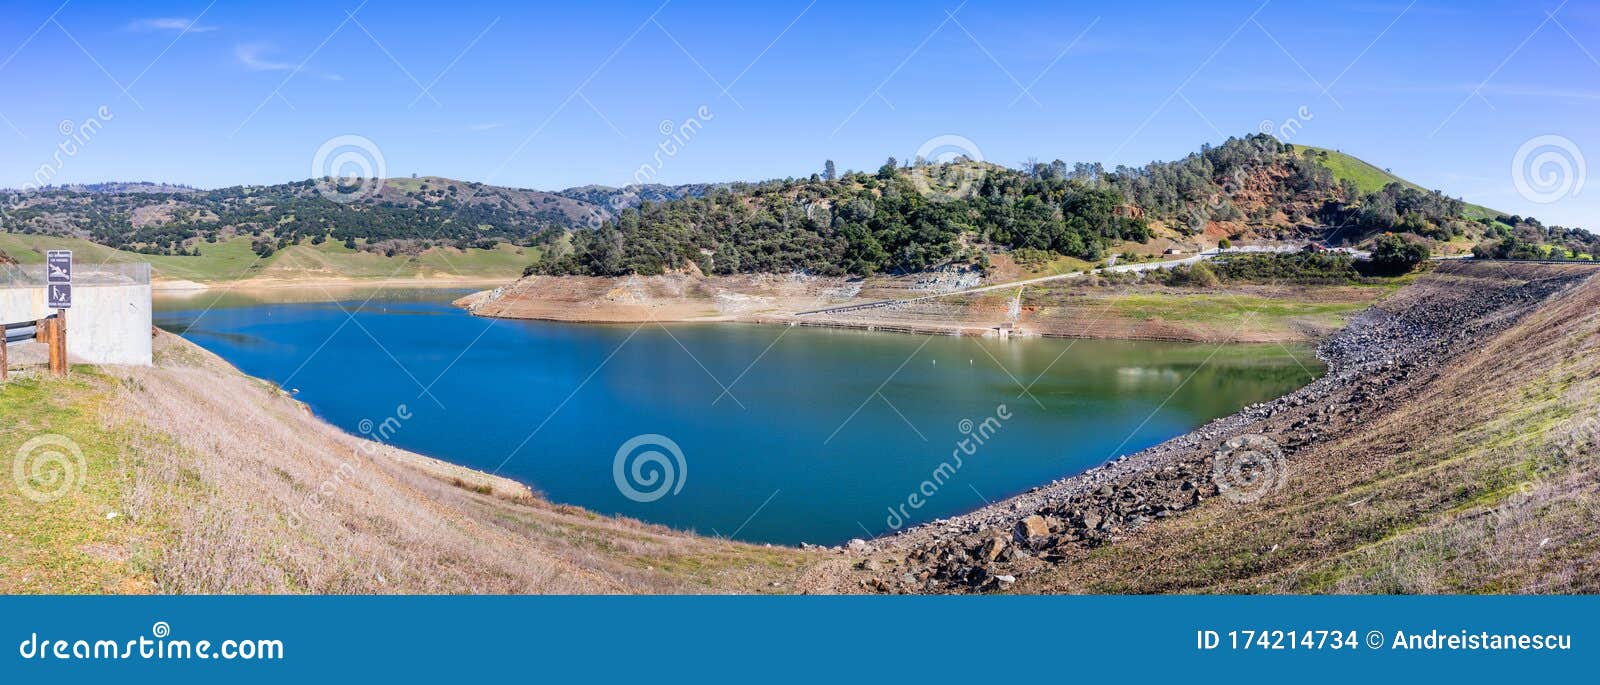 high-angle-view-of-anderson-reservoir-a-man-made-lake-in-morgan-hill